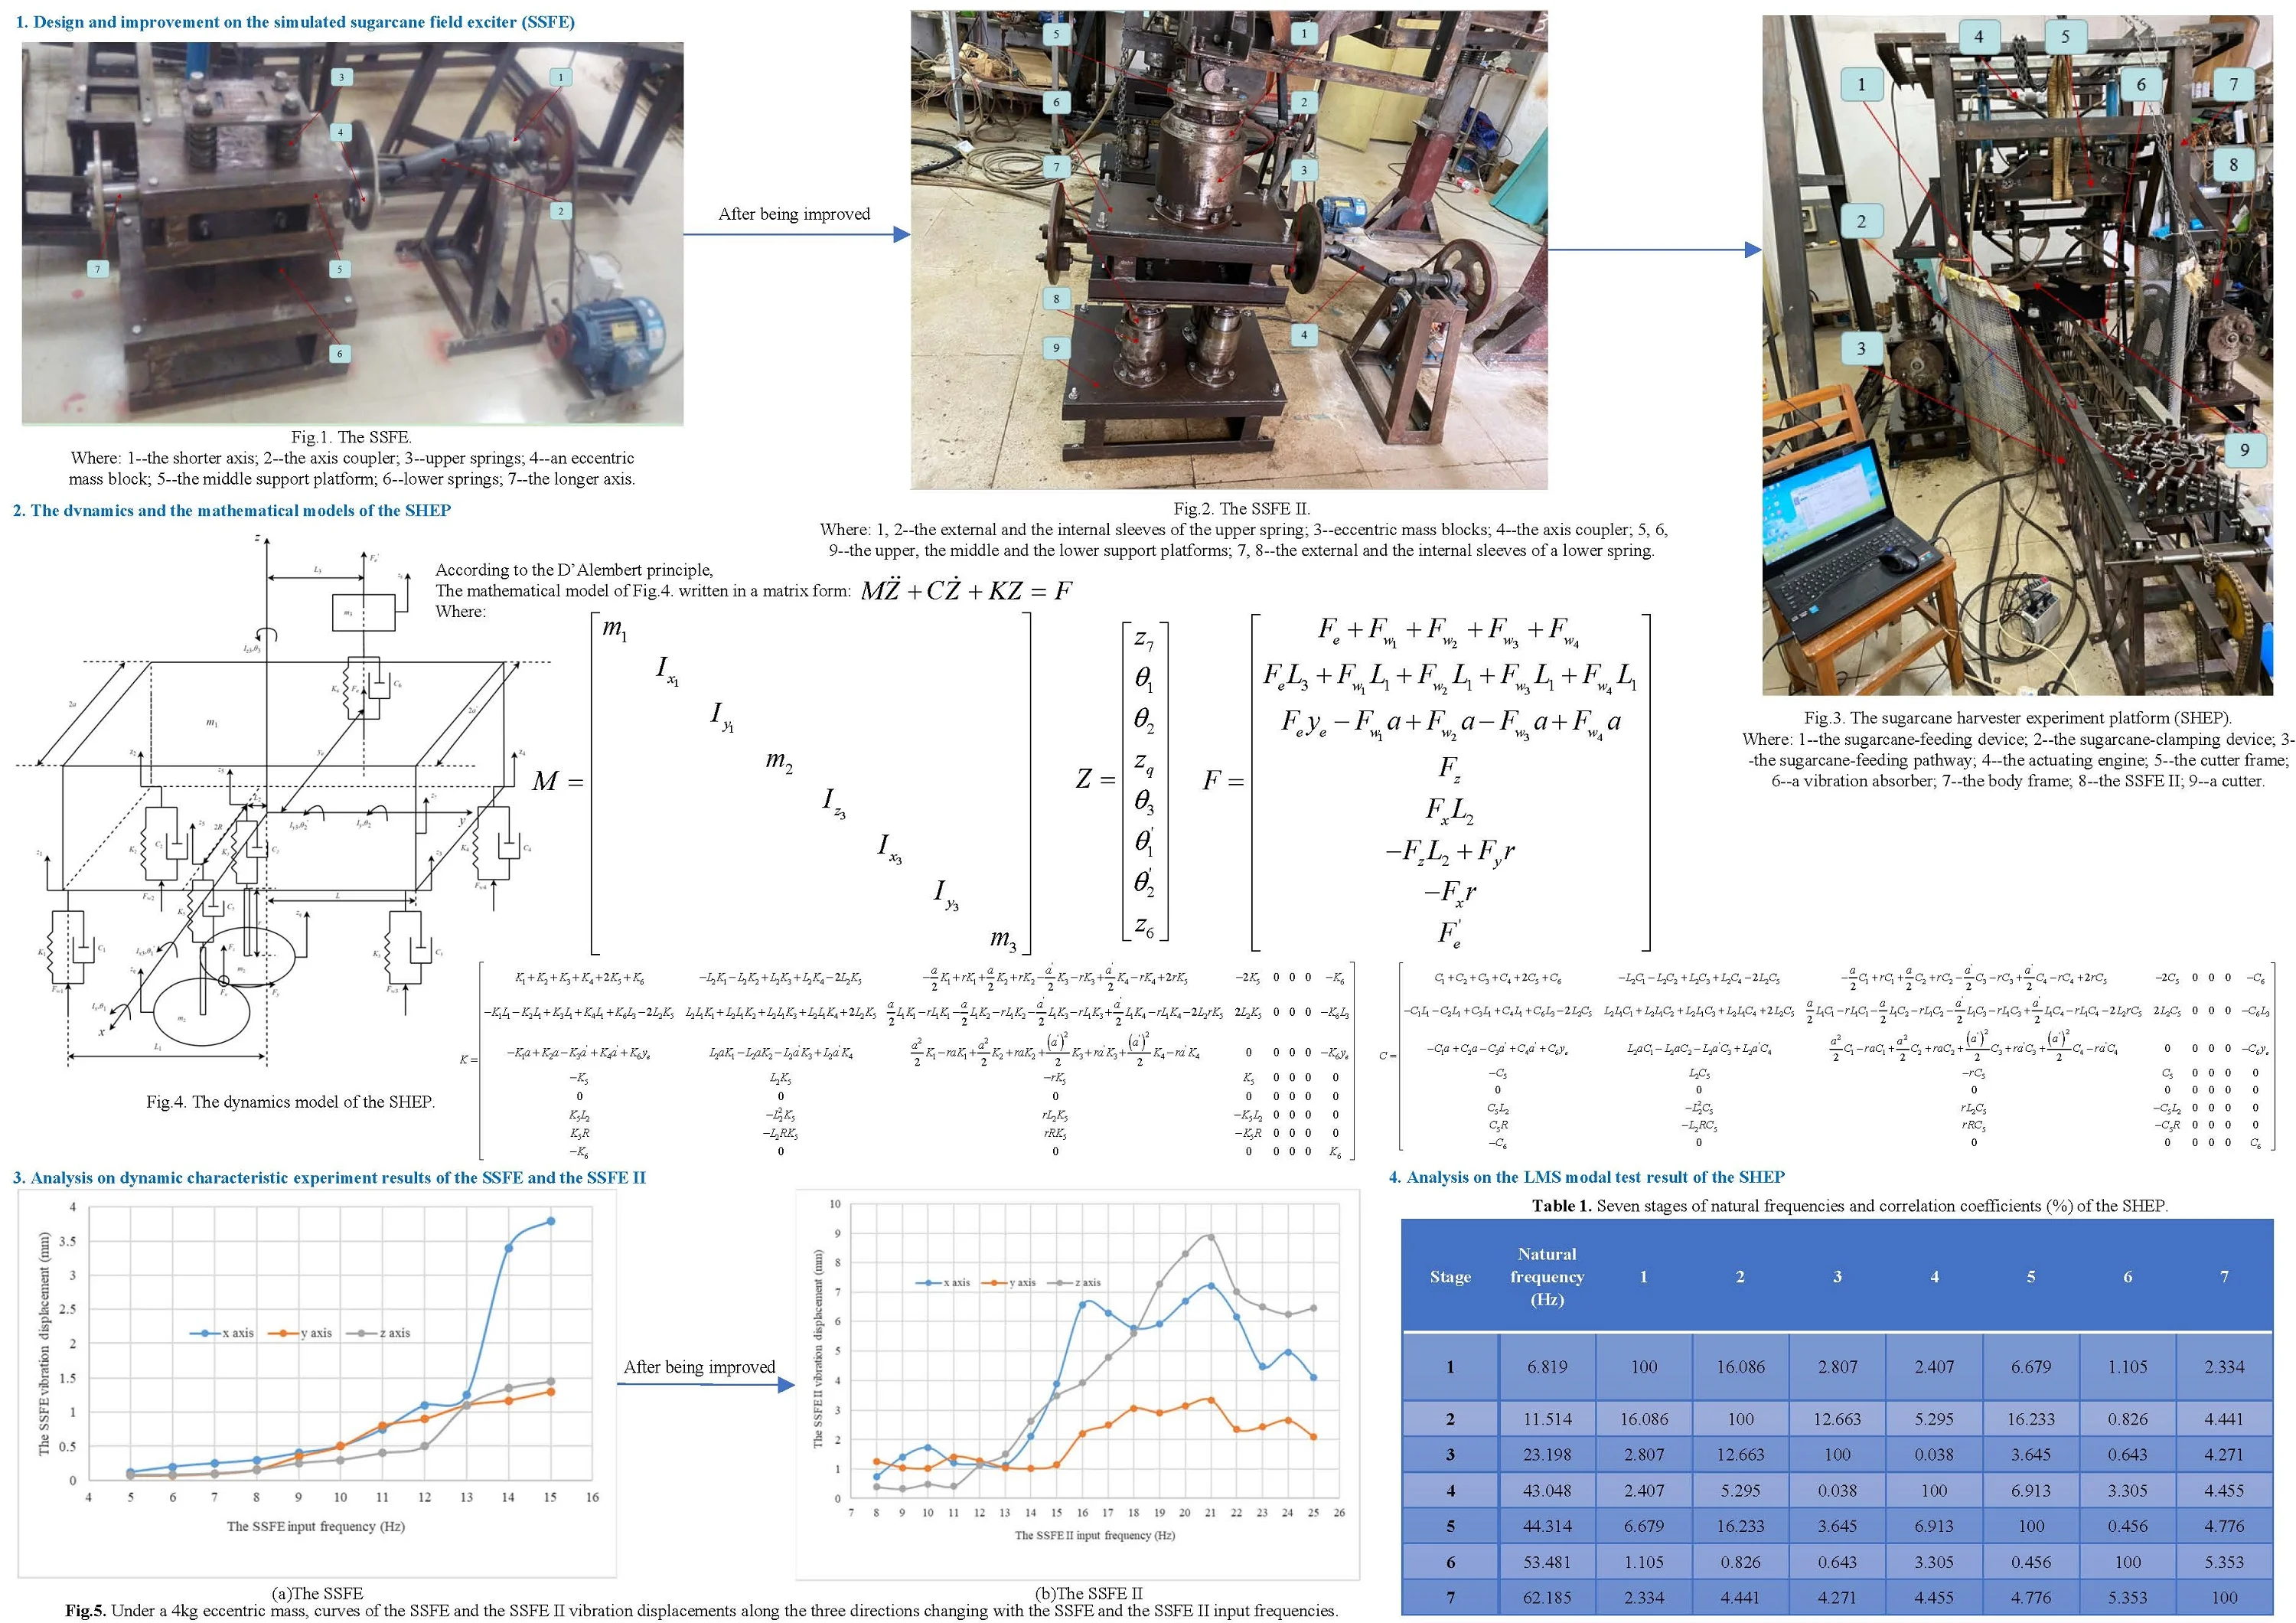 Dynamic characteristic research on a simulated sugarcane field exciter for small sugarcane harvesters: simulations and experiments